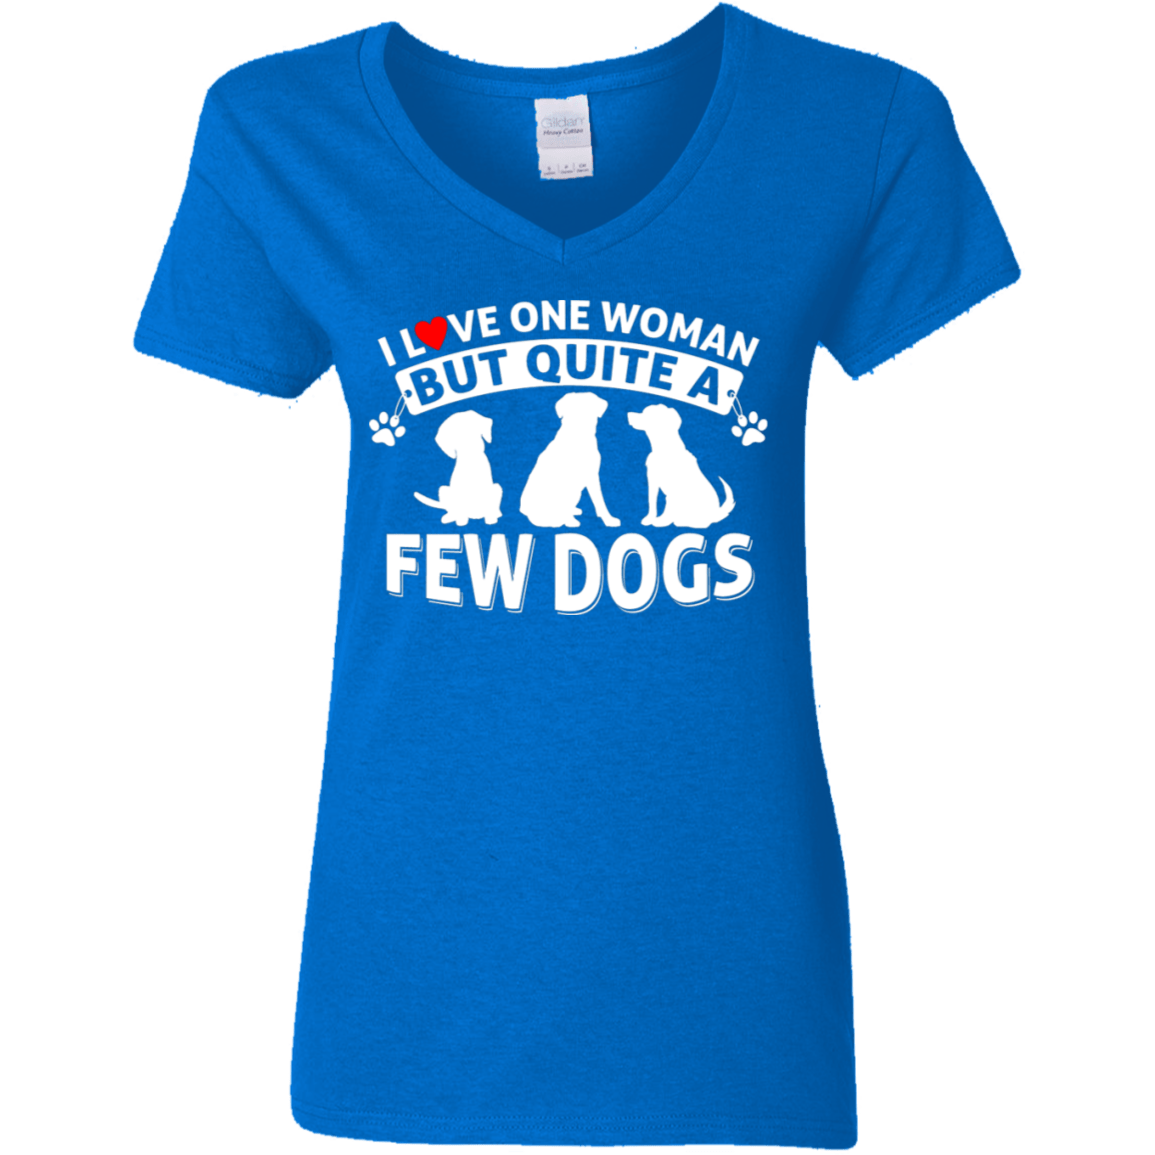 Love One Woman Few Dogs - Ladies V Neck.